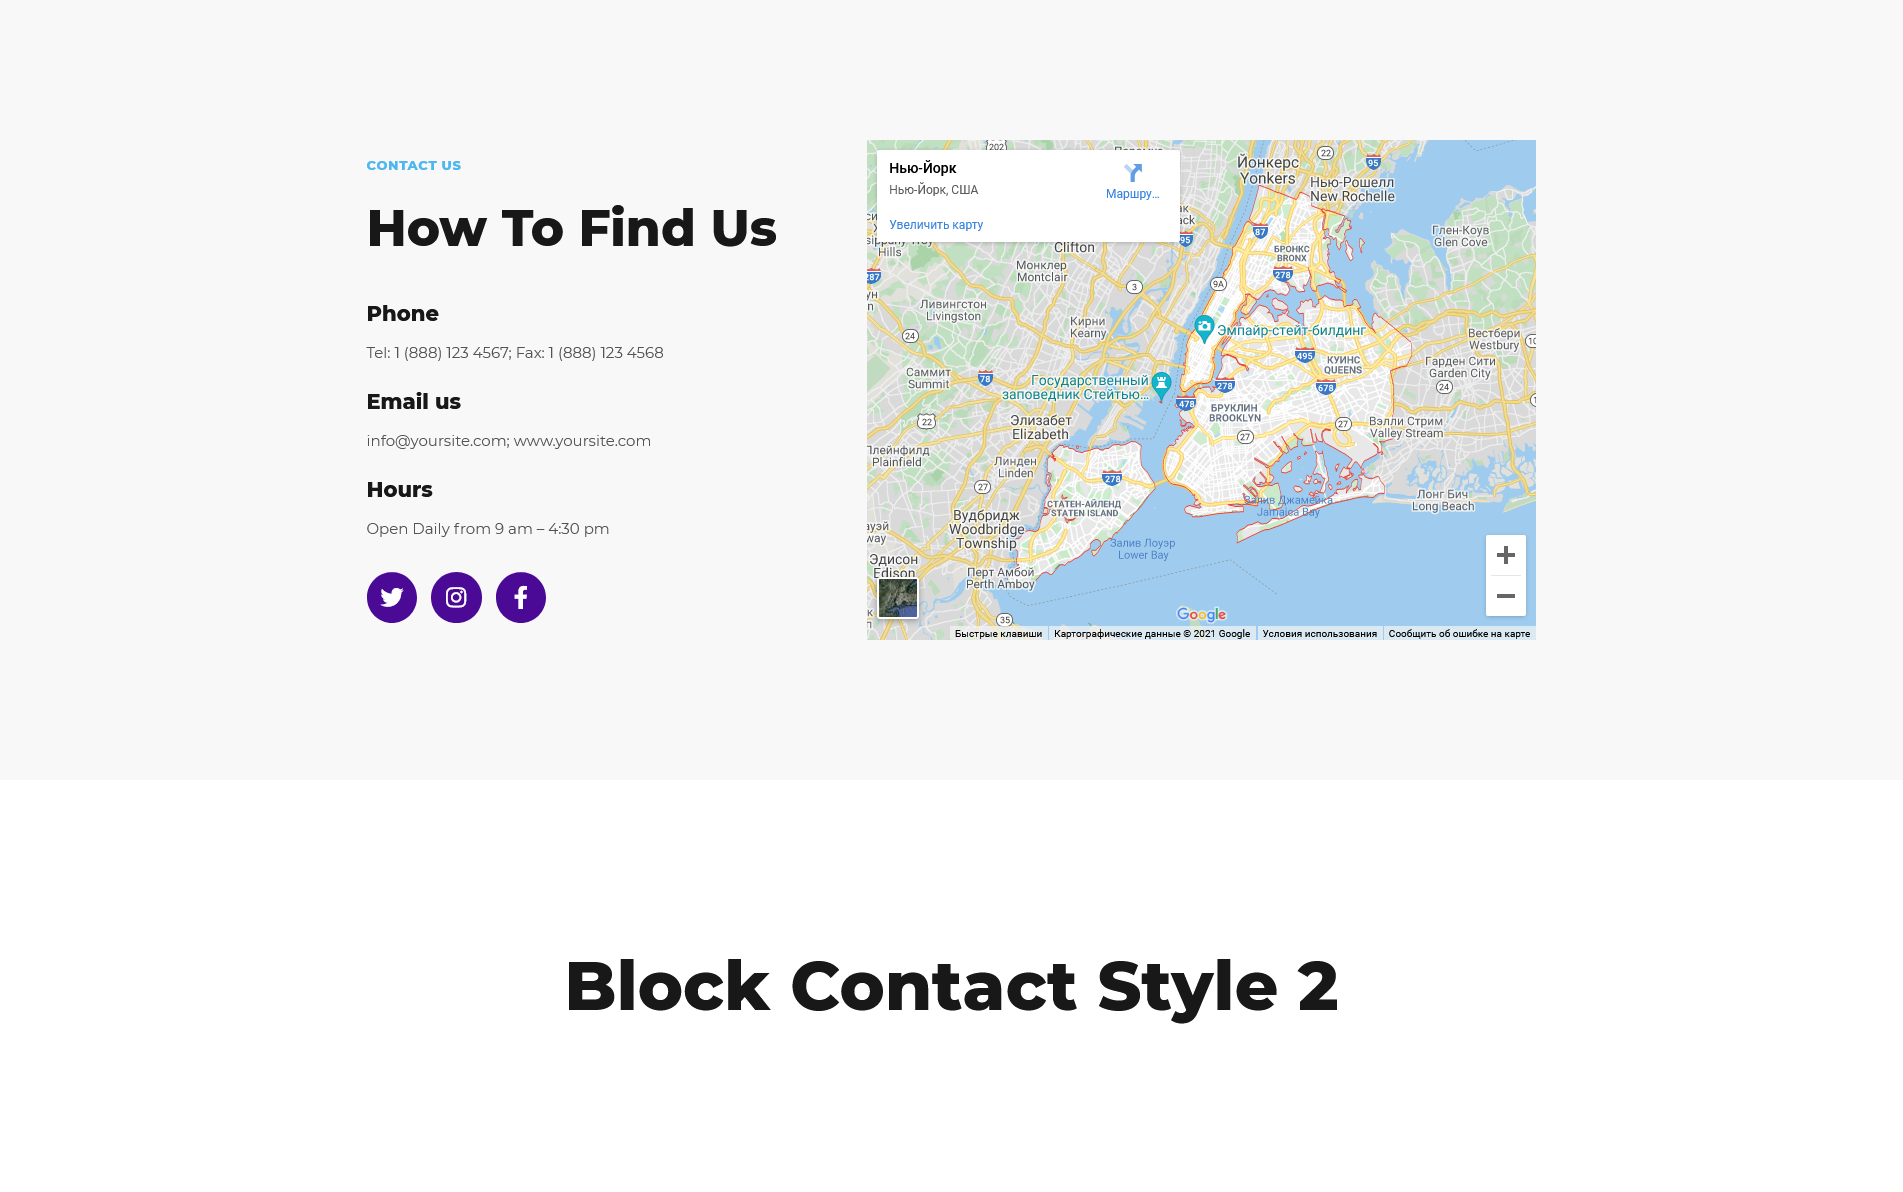 Block Contact Style 2